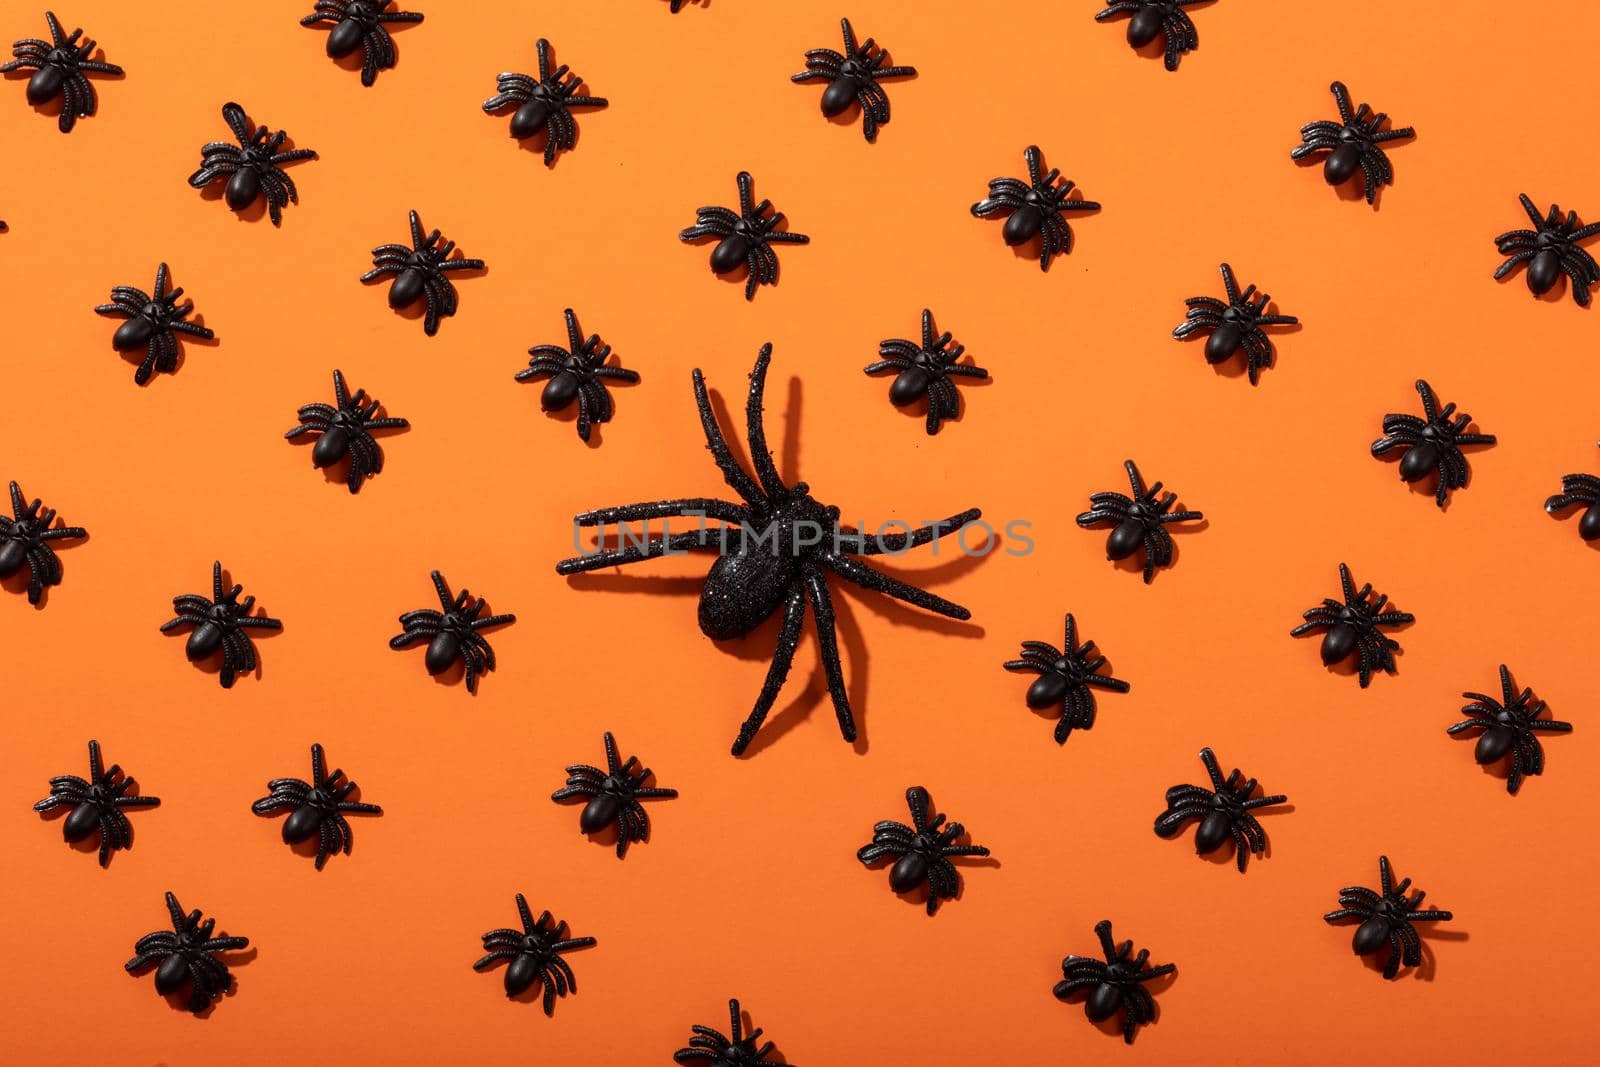 Composition of halloween decorations with rows of black spiders on orange background by Wavebreakmedia